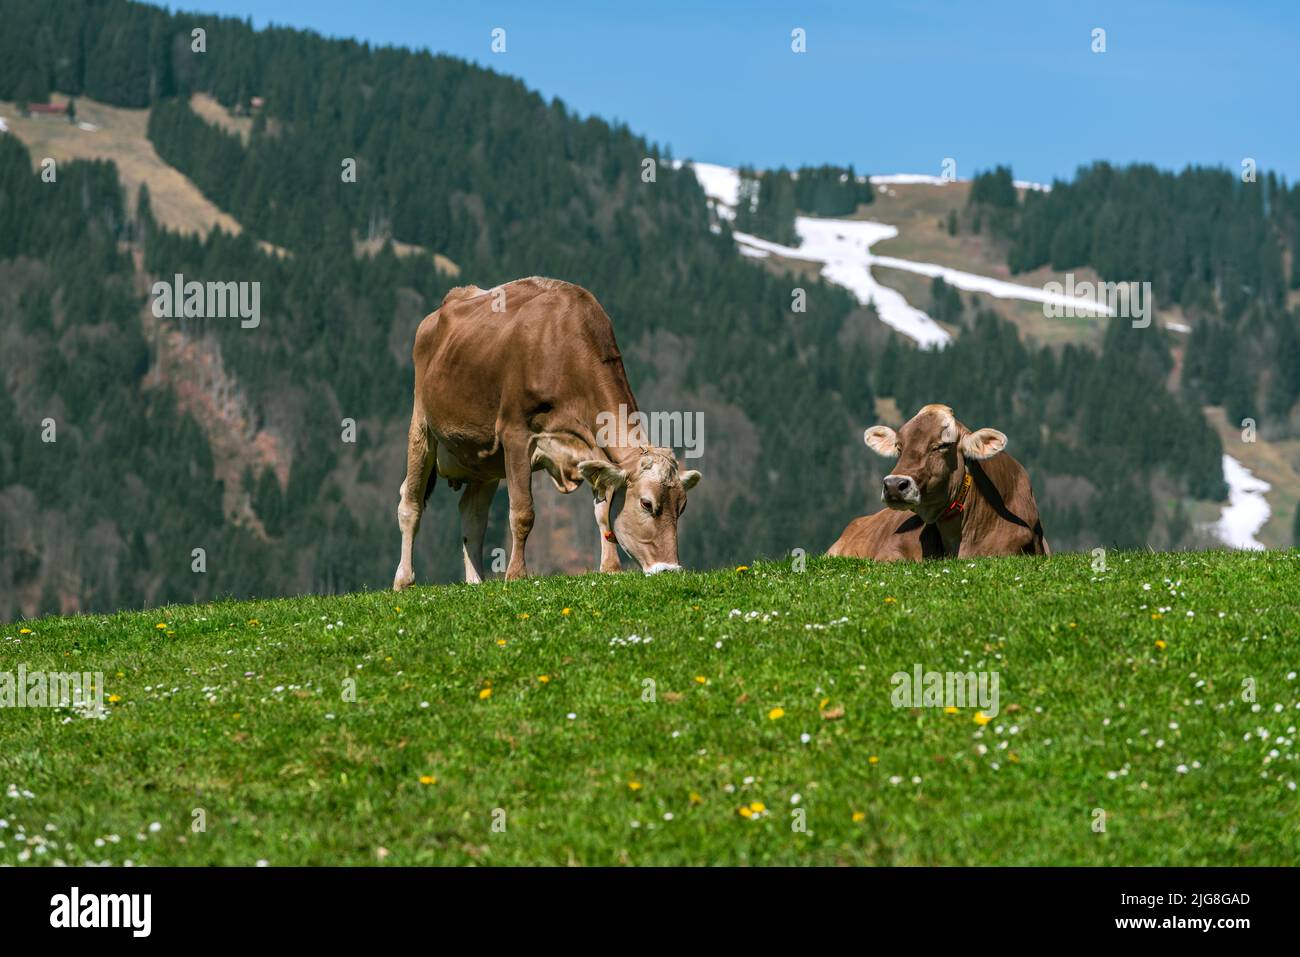 Cattle on a mountain pasture Stock Photo